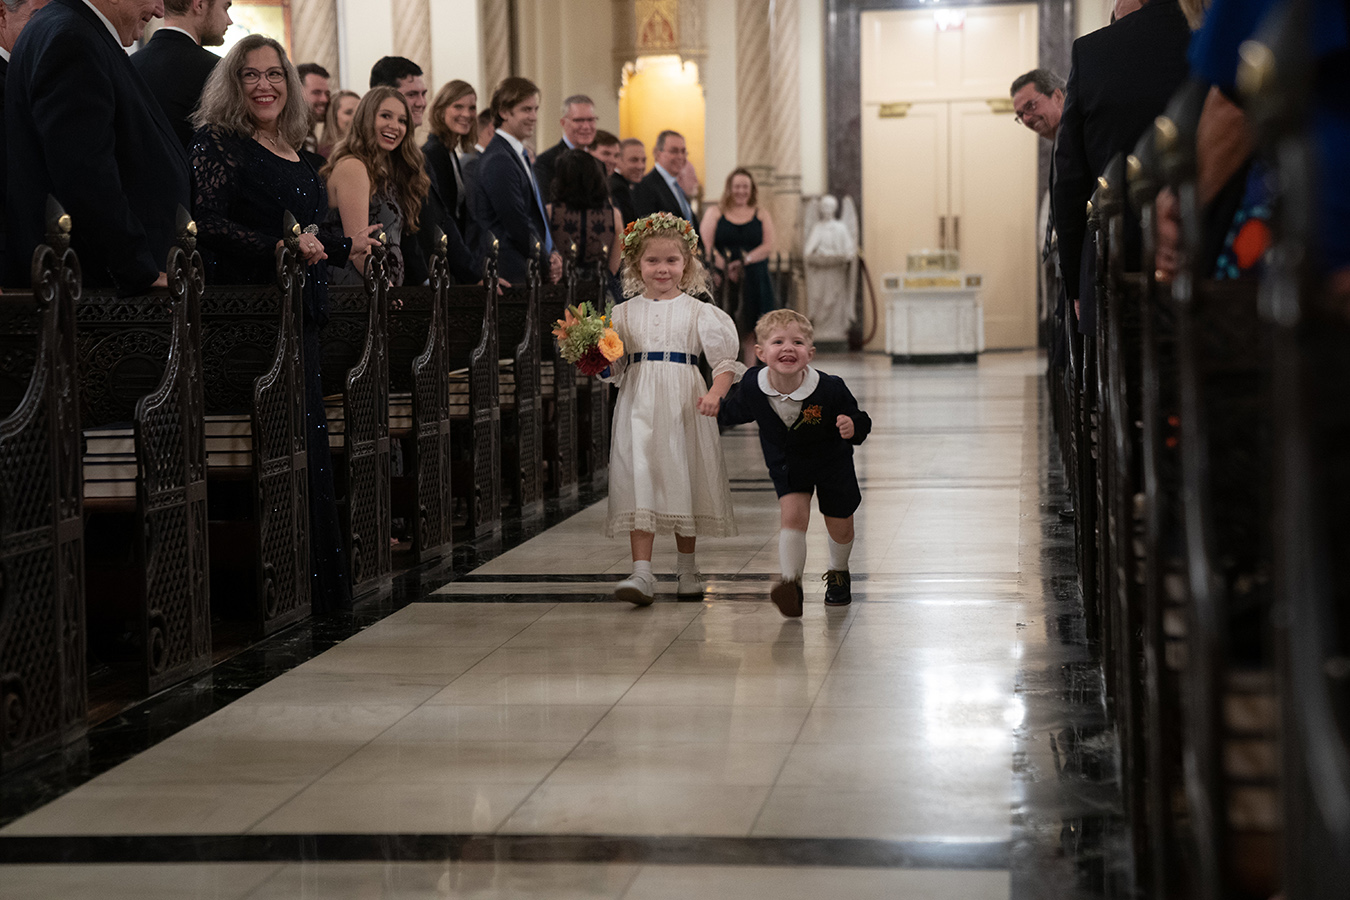 The couples didn't have a ring "bear"er, but a ring "dinosaur" according to Margaret's 3-year-old nephew George, who stomped up the aisle like a dinosaur with the flower girl, Margaret’s niece, Caroline.